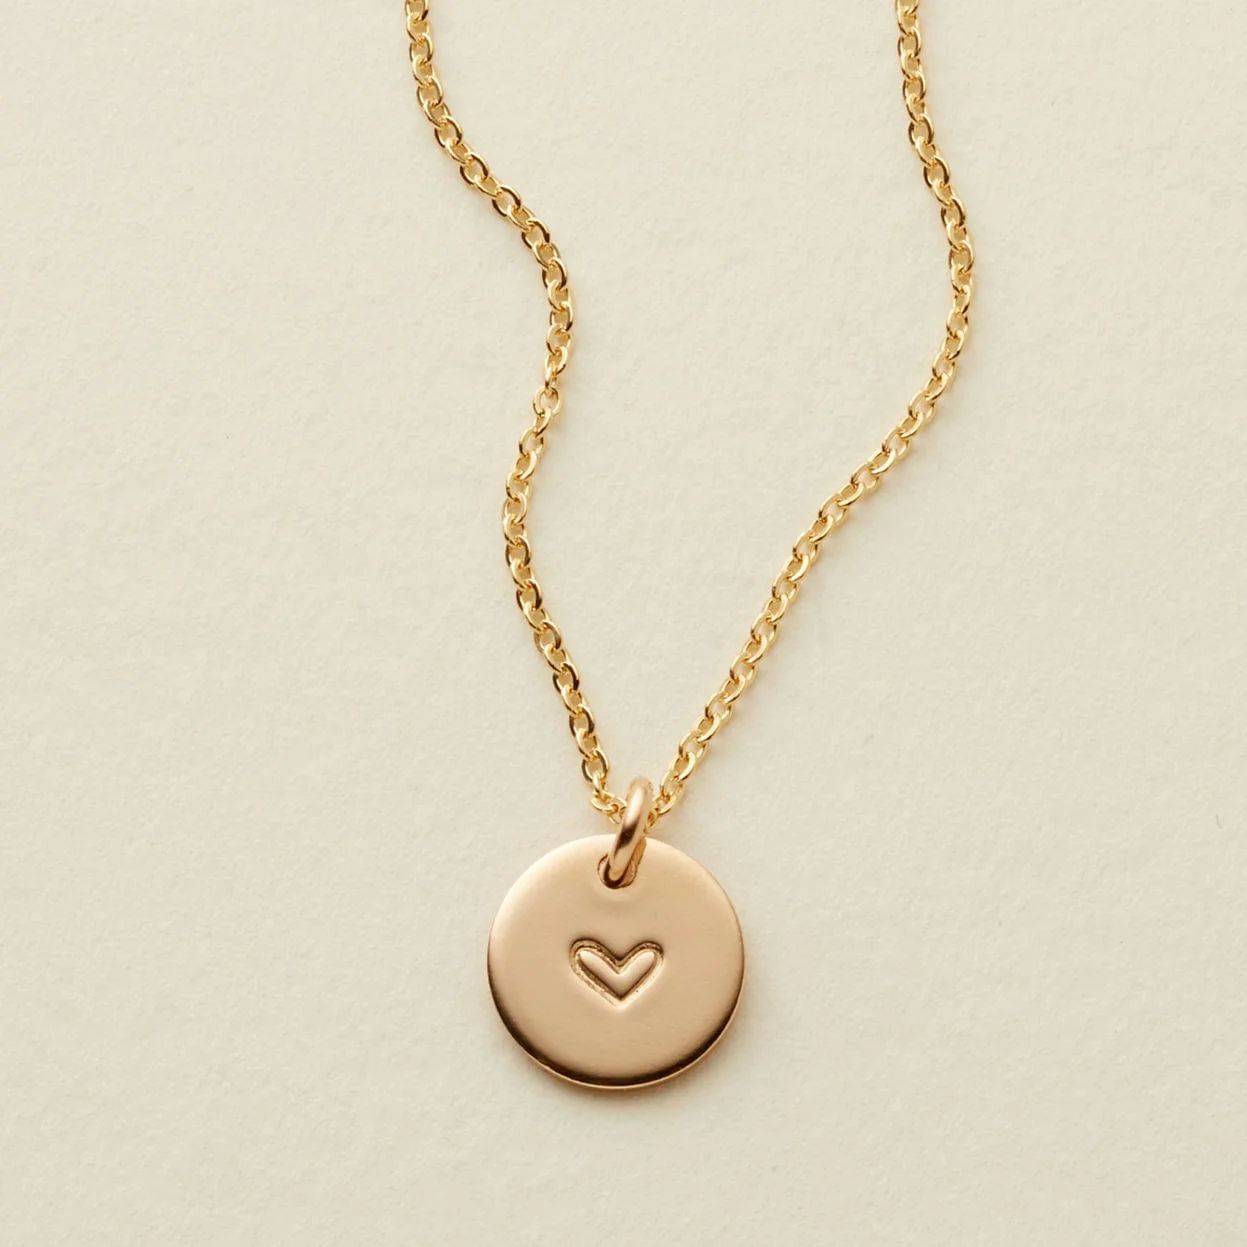 Made By Mary Heart Disc Necklace | Handmade w/ Love, Hand Stamped | Made by Mary (US)